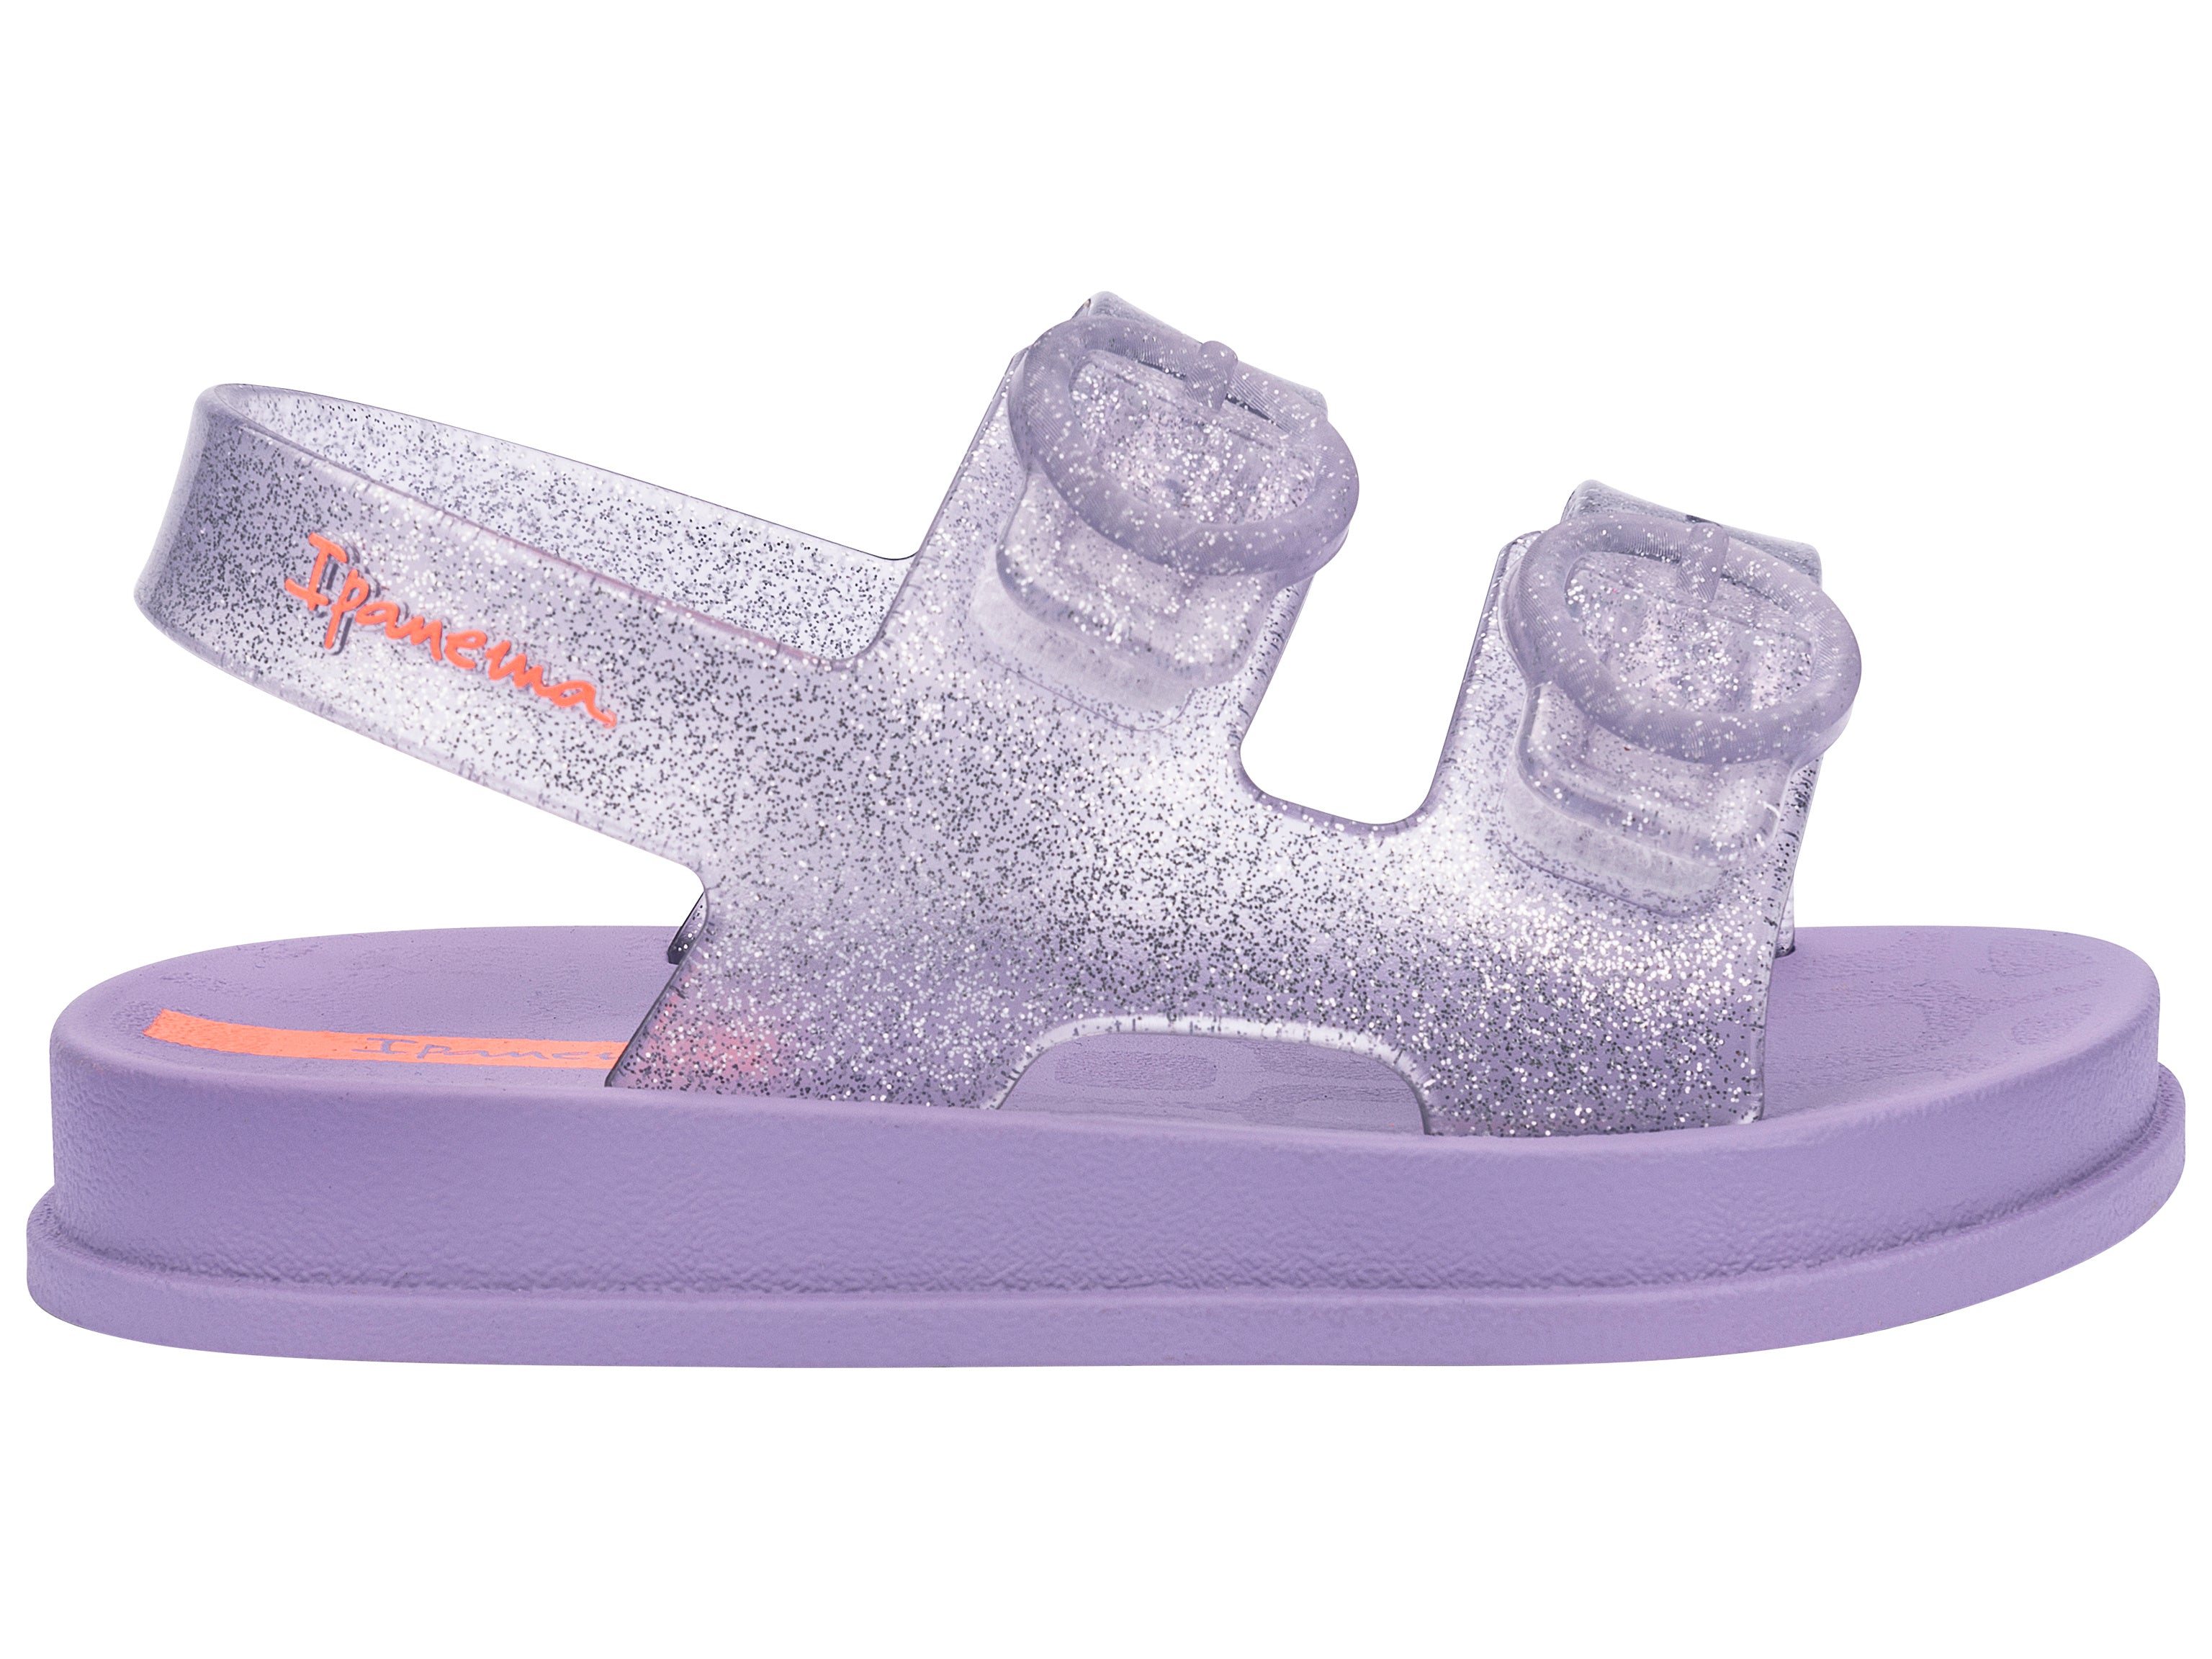 Outer side view of a purple Ipanema Follow baby sandal with two decorative buckles on the upper.